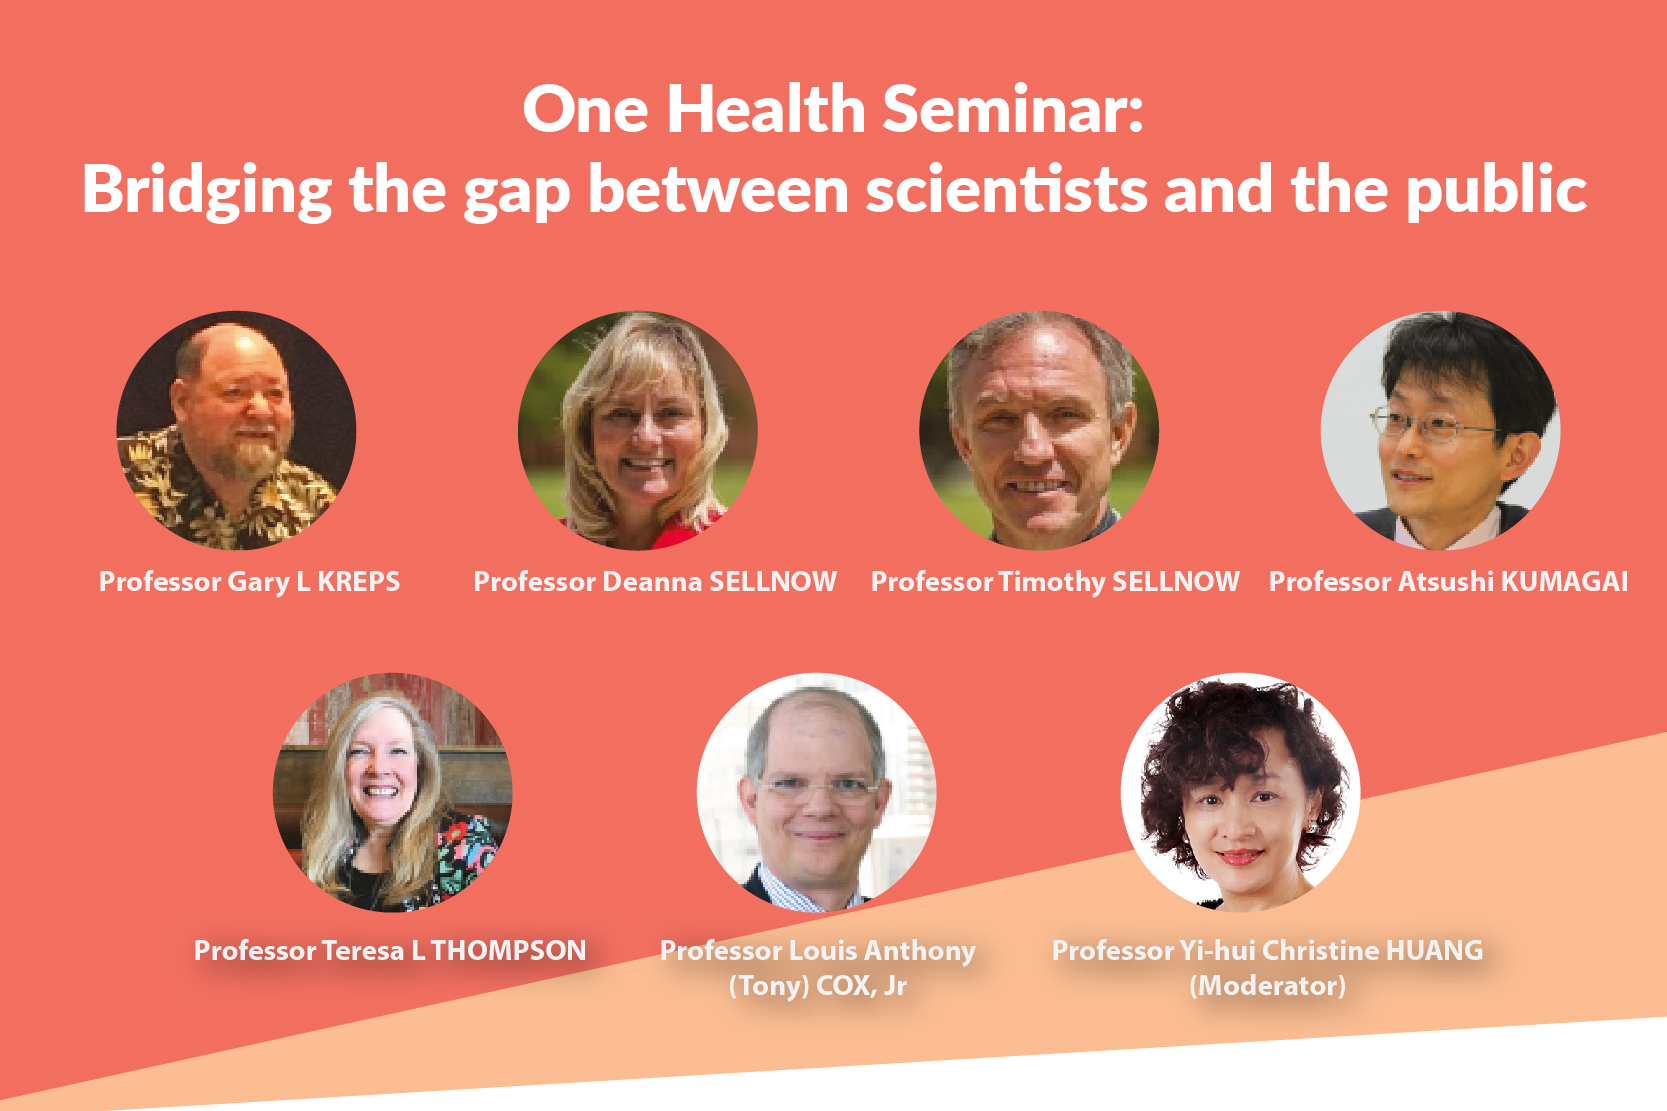 Online Seminar Gather Experts for Health Communication Discussion